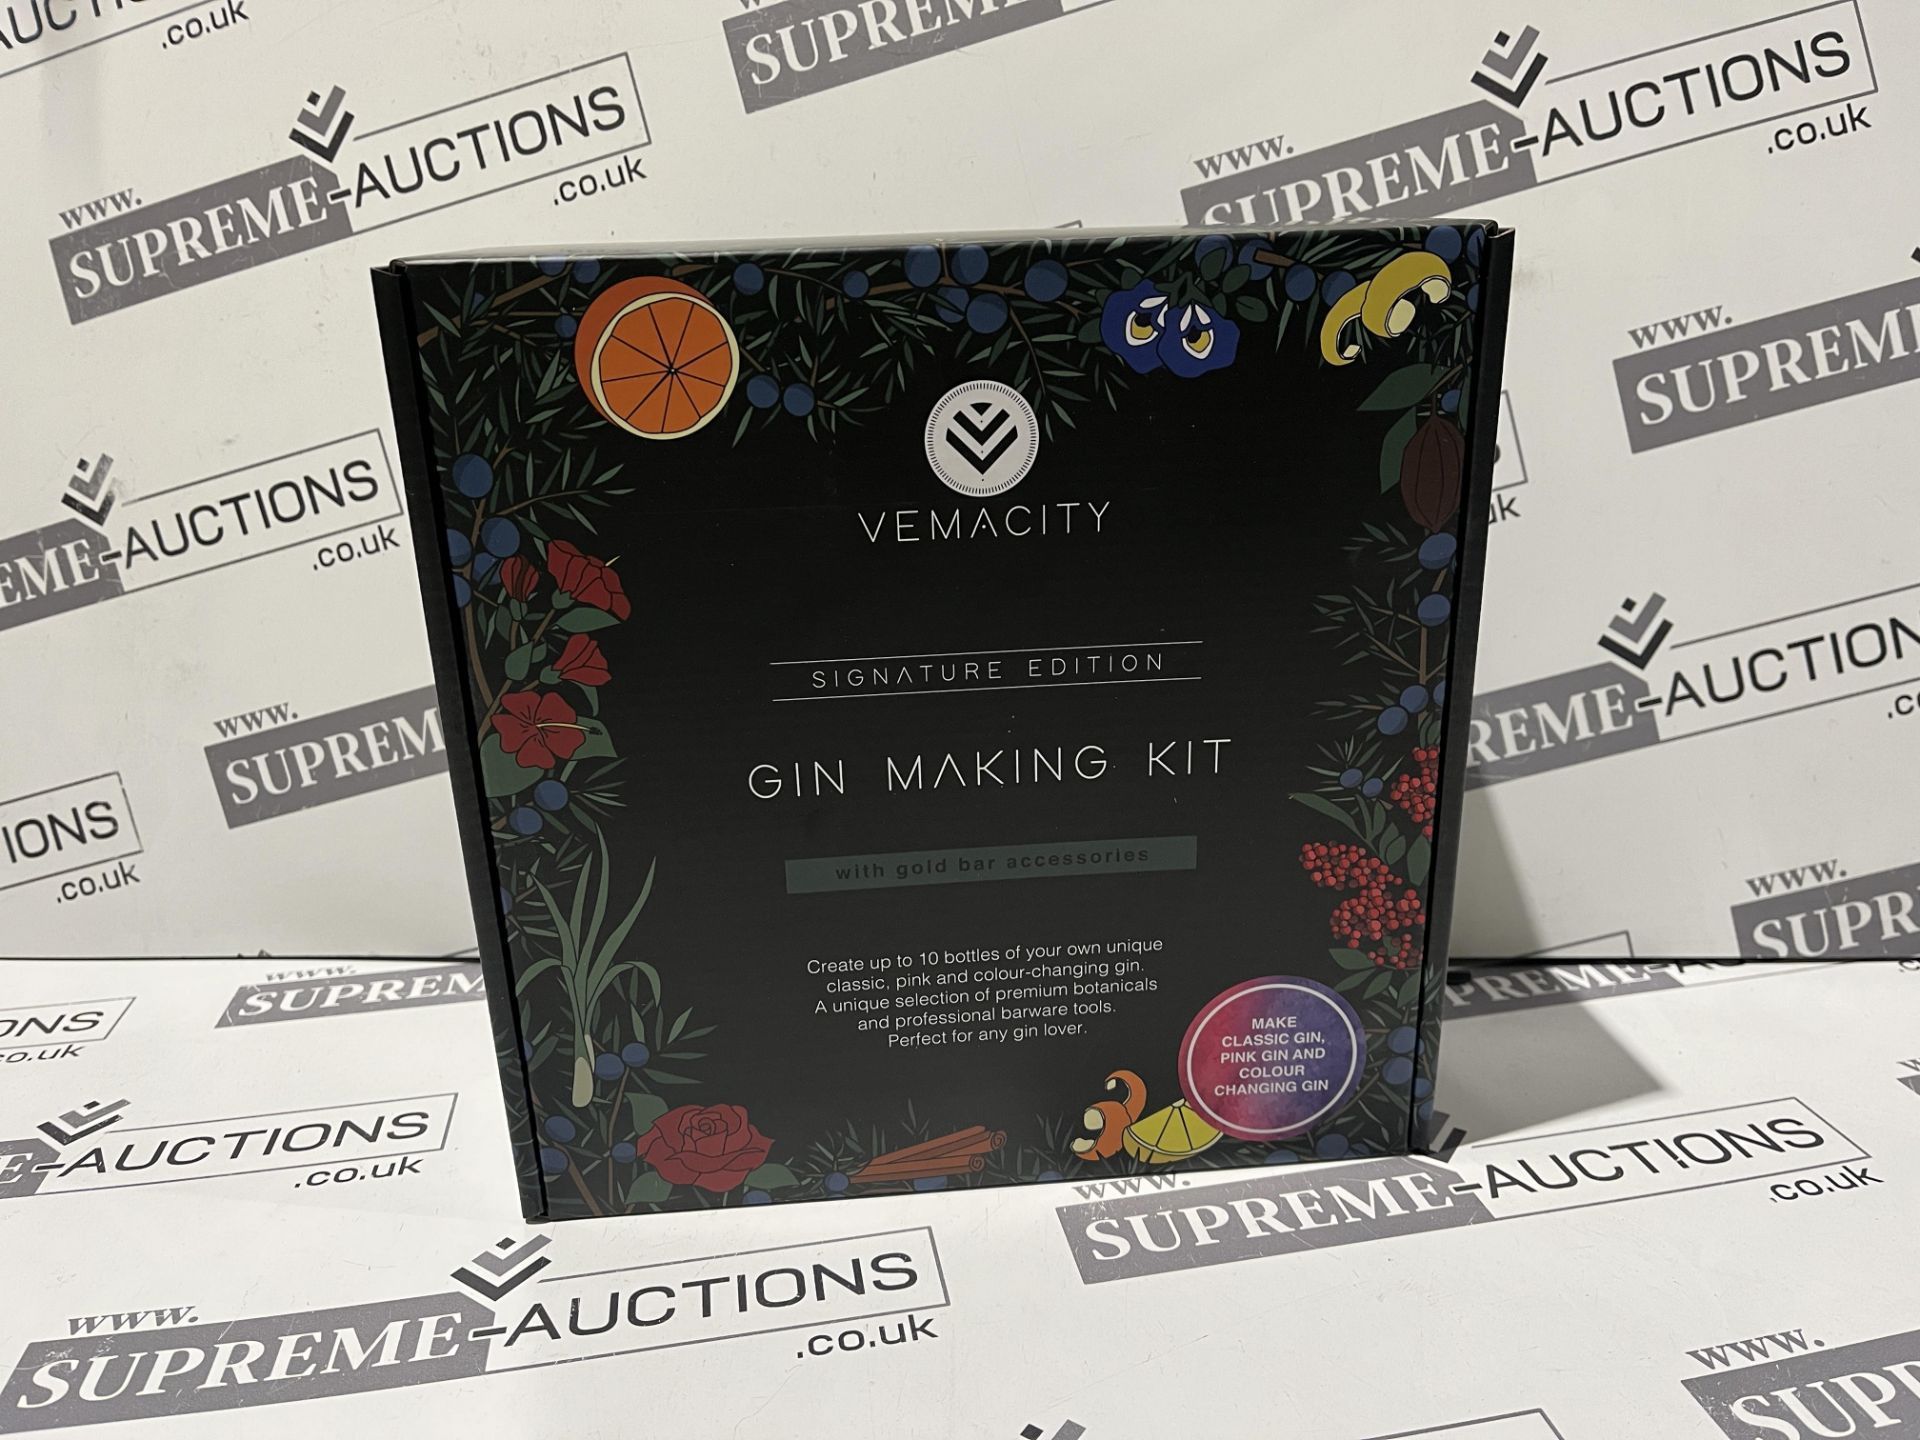 10 X BRAND NEW VEMACITY SIGNATURE GIN MAKING KITS WITH GOLD BAR ACCESSORIES RRP £42 EACH R10-9